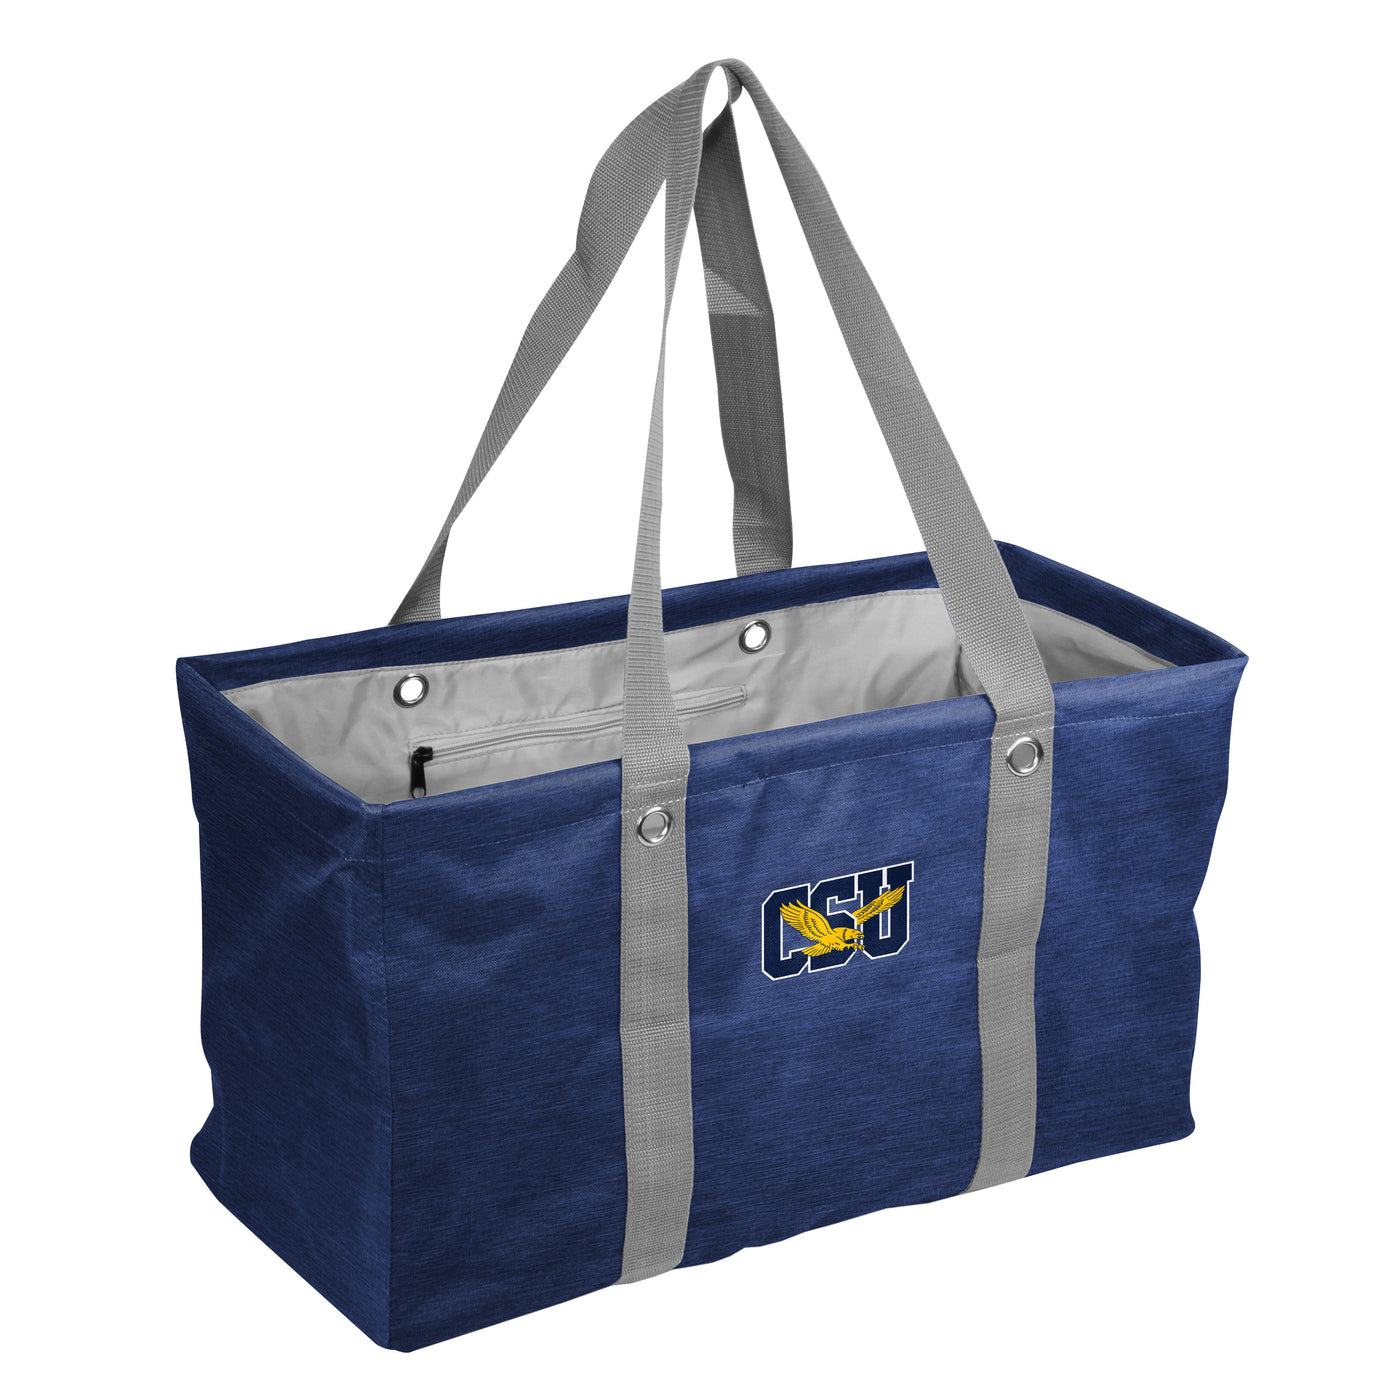 Coppin State Picnic Caddy